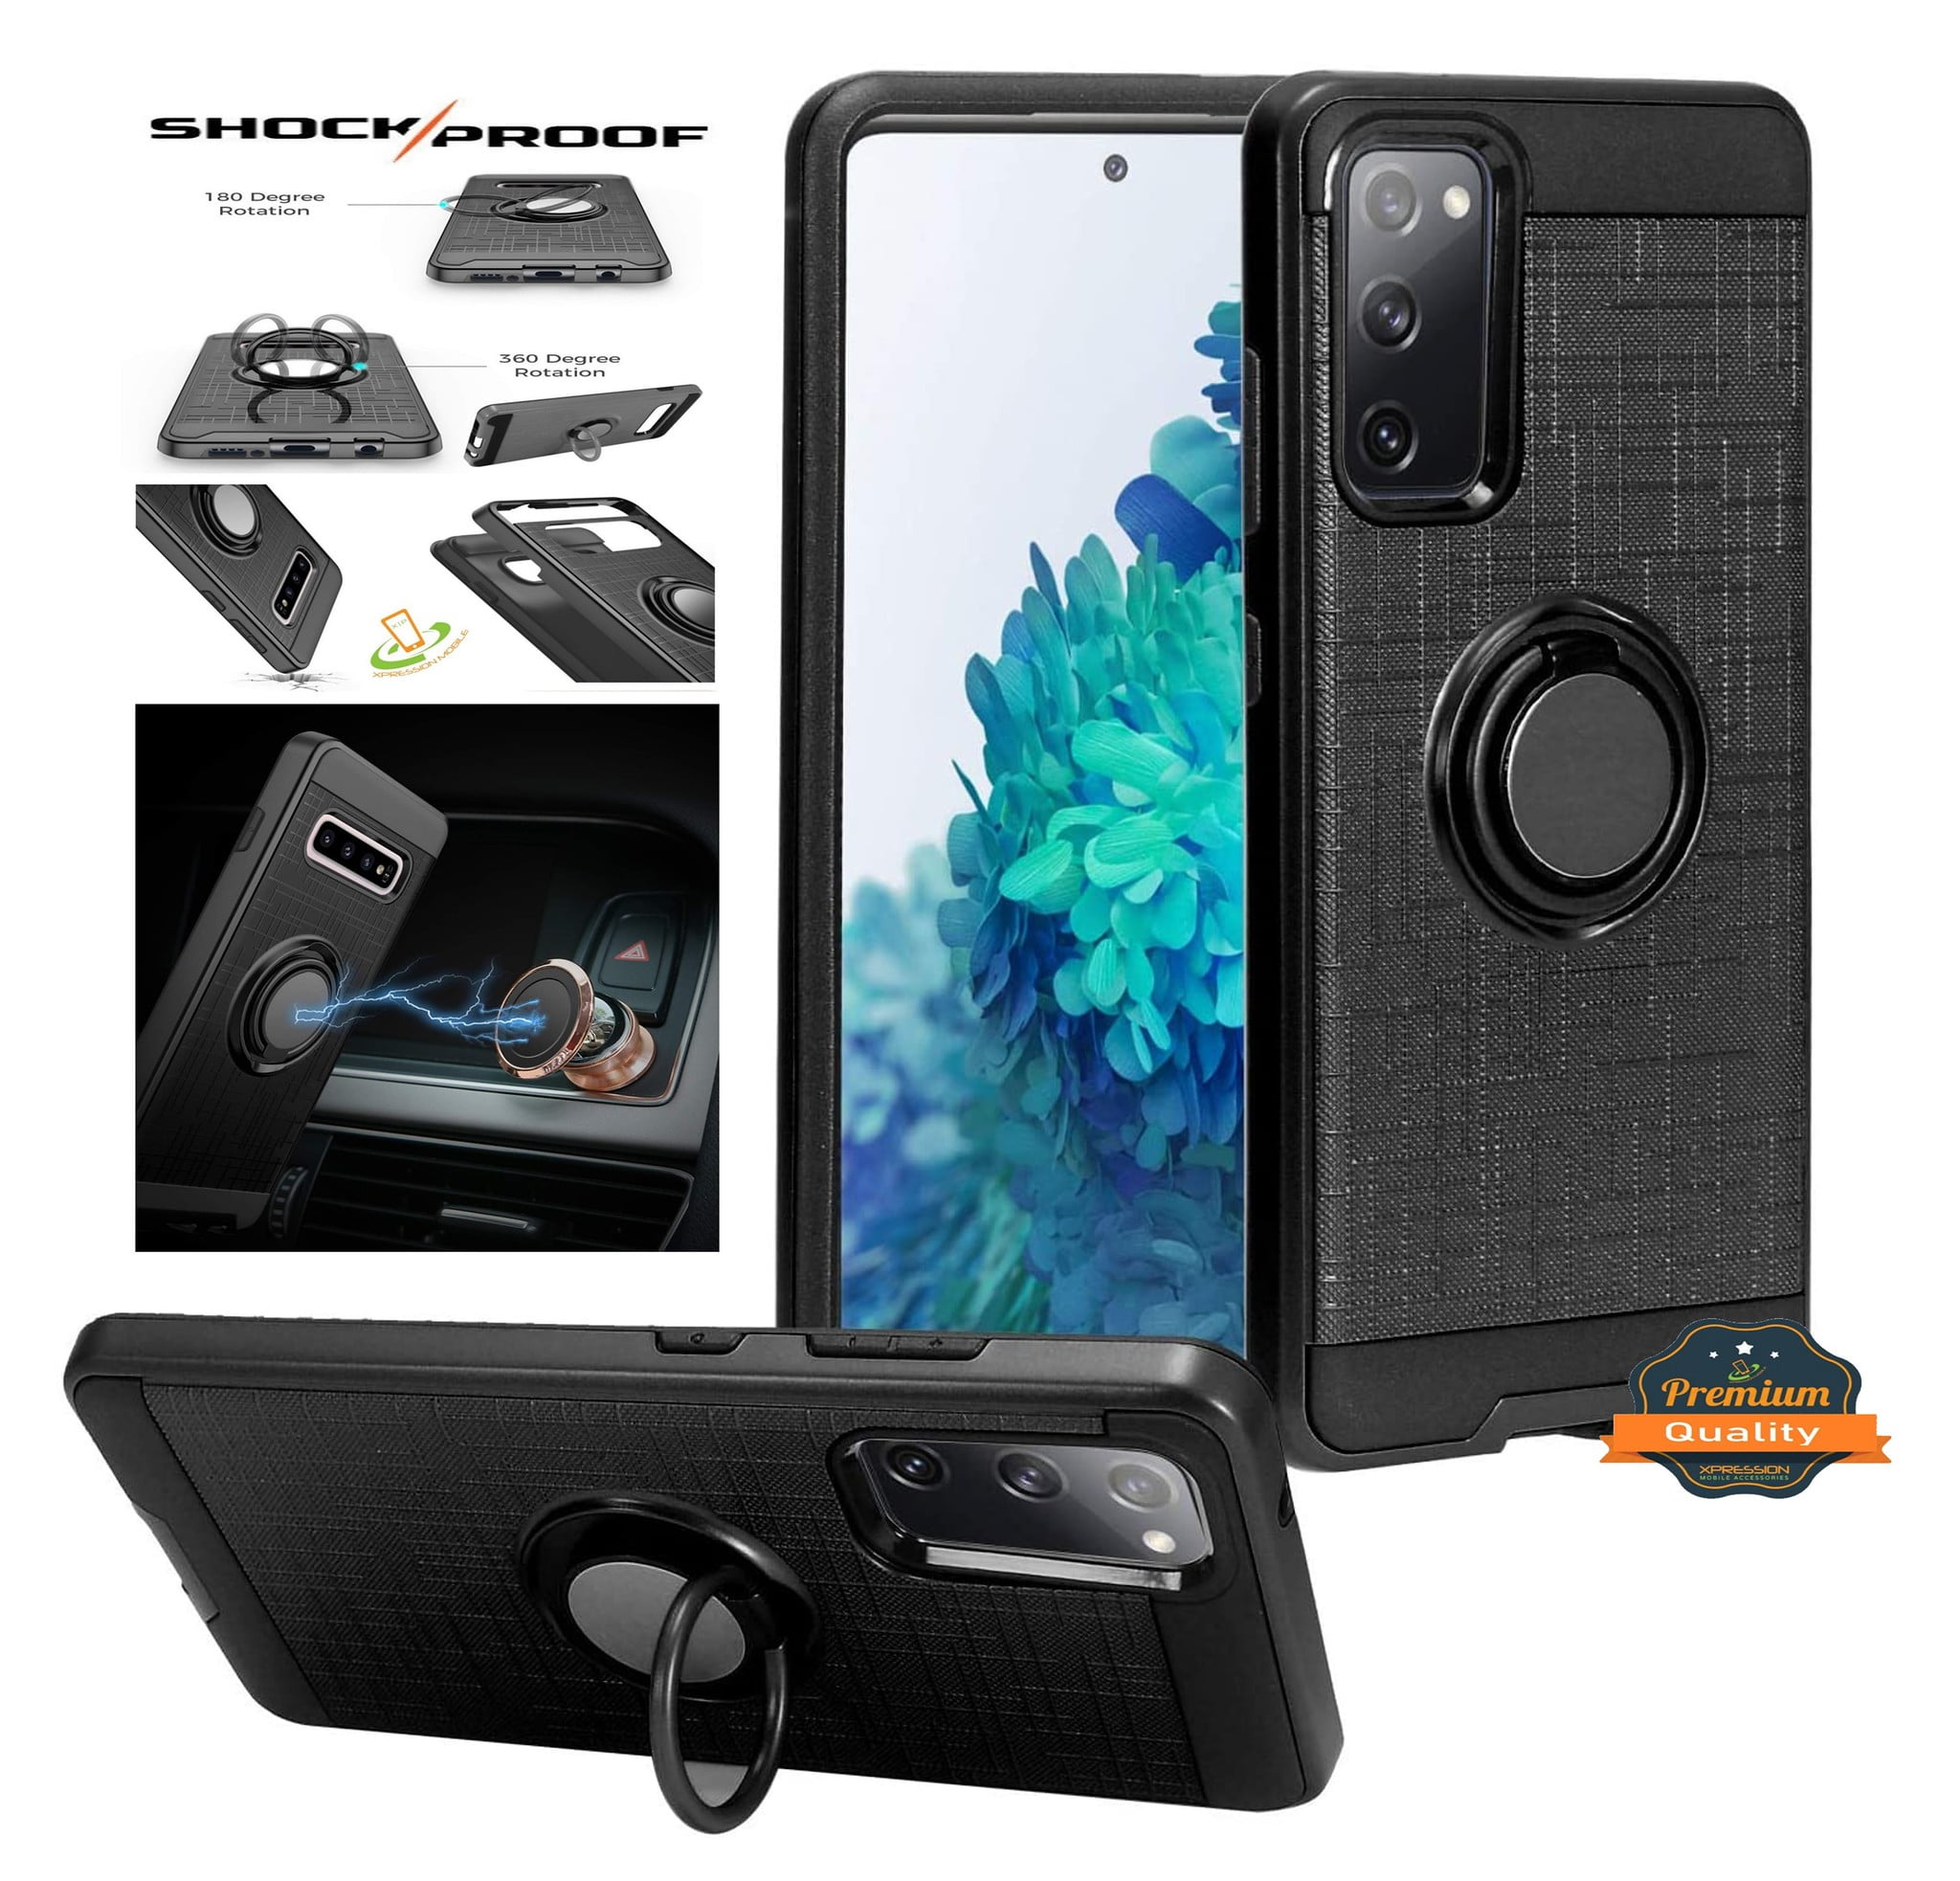 Case for Motorola Moto One 5G, Moto G 5G Plus Hybrid 360° Ring Armor Shockproof Rugged 2 in 1 Holder with Ring Stand Cover by Xcell - Black - Walmart.com